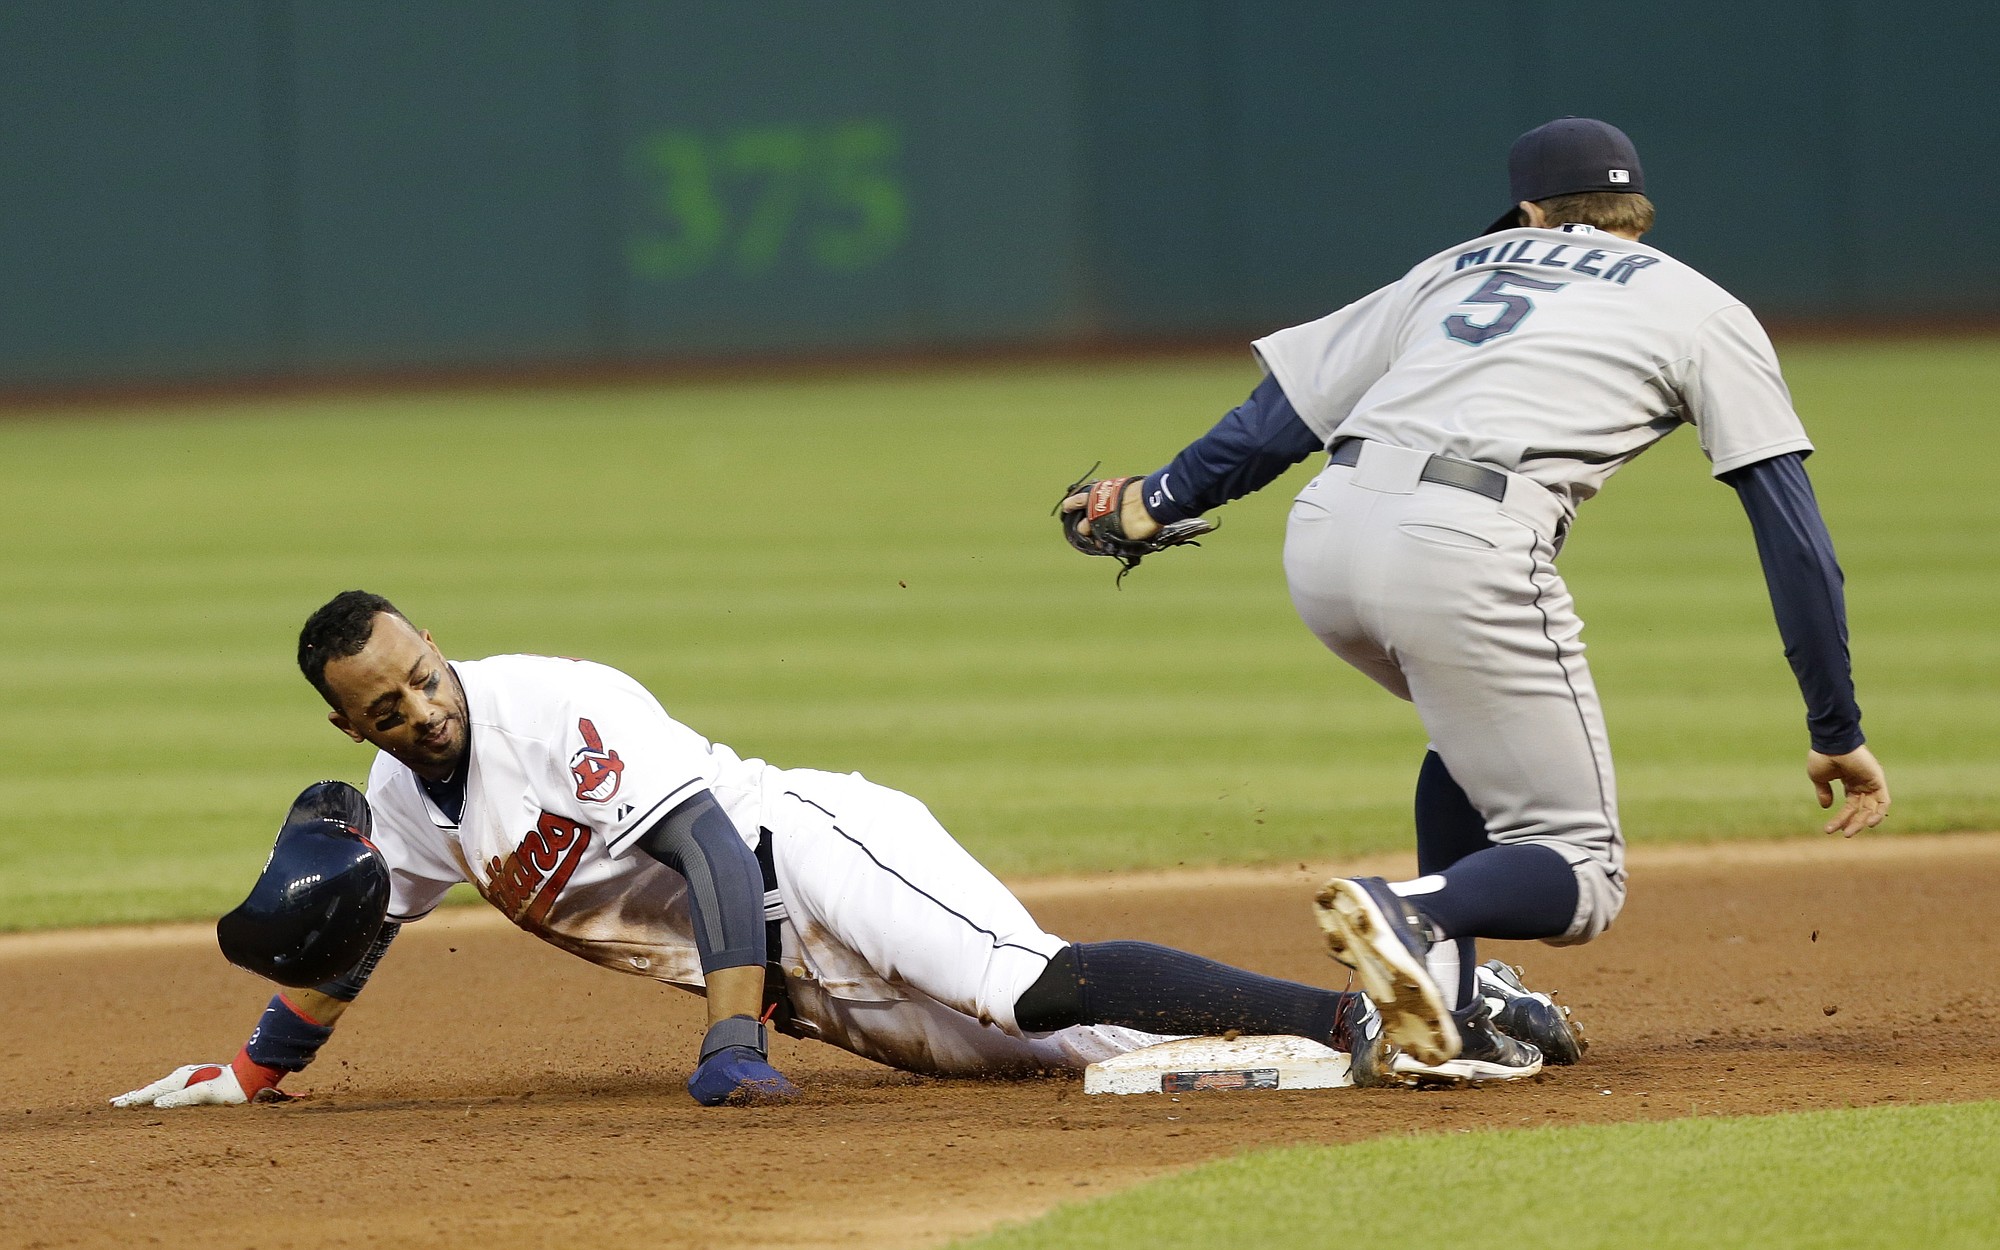 Cleveland Indians' Chris Dickerson, left,  slides safely into second base on a steal as Seattle Mariners' Brad Miller is late on the tag in the fifth inning of a baseball game Wednesday, July 30, 2014, in Cleveland.